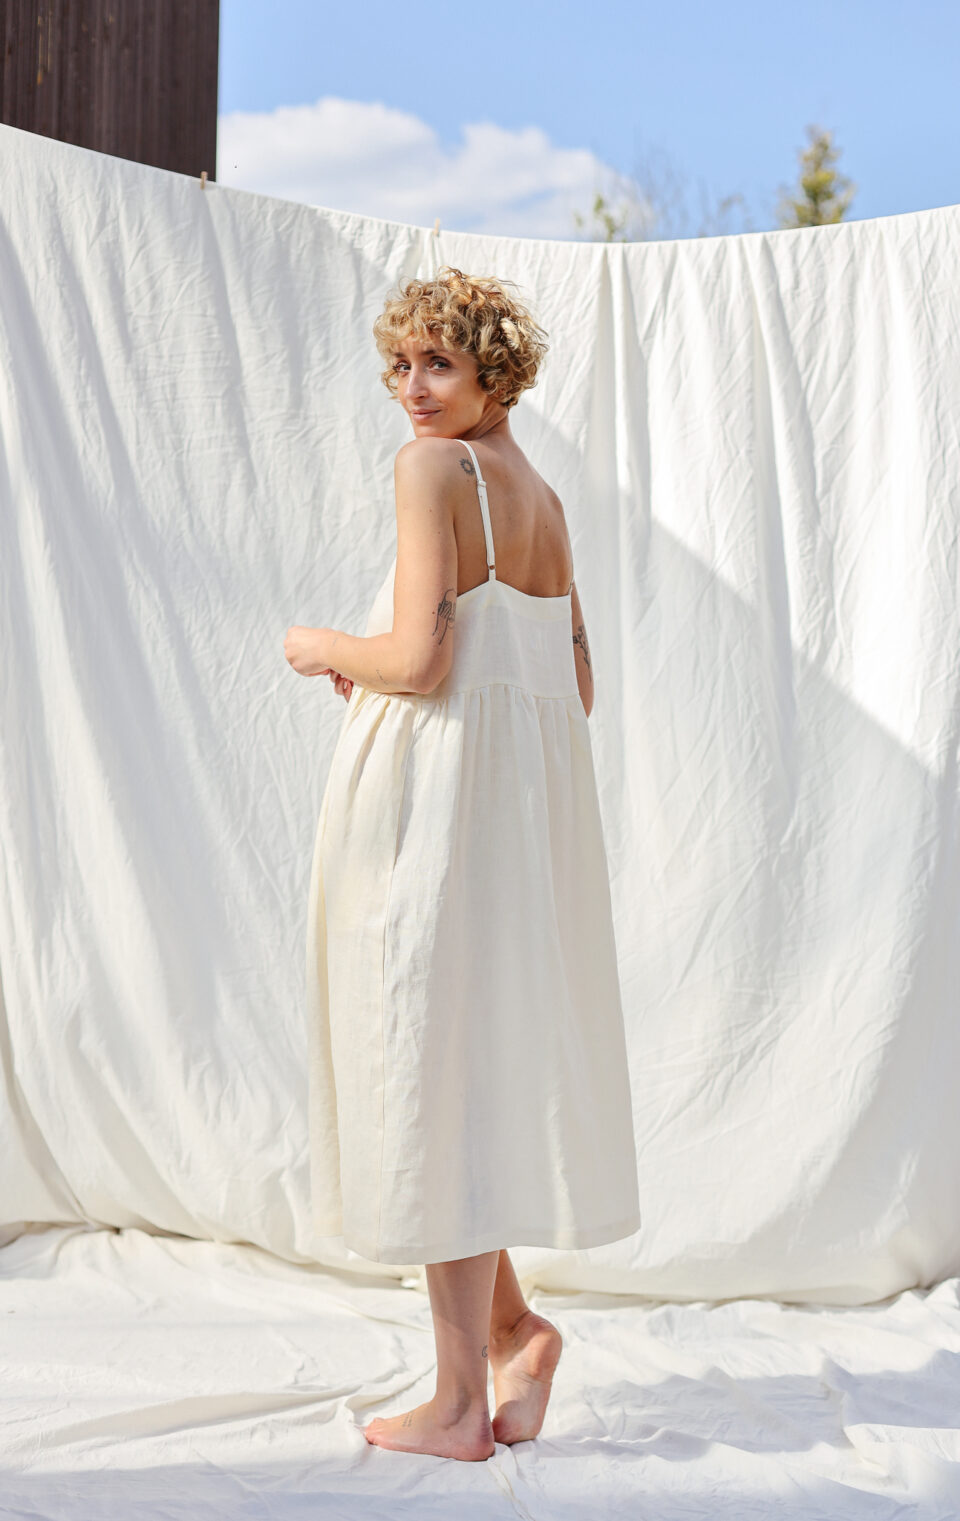 Wedding Dress Color Guide: Shades of White - Tiffany's Bridal Boutique, LLC